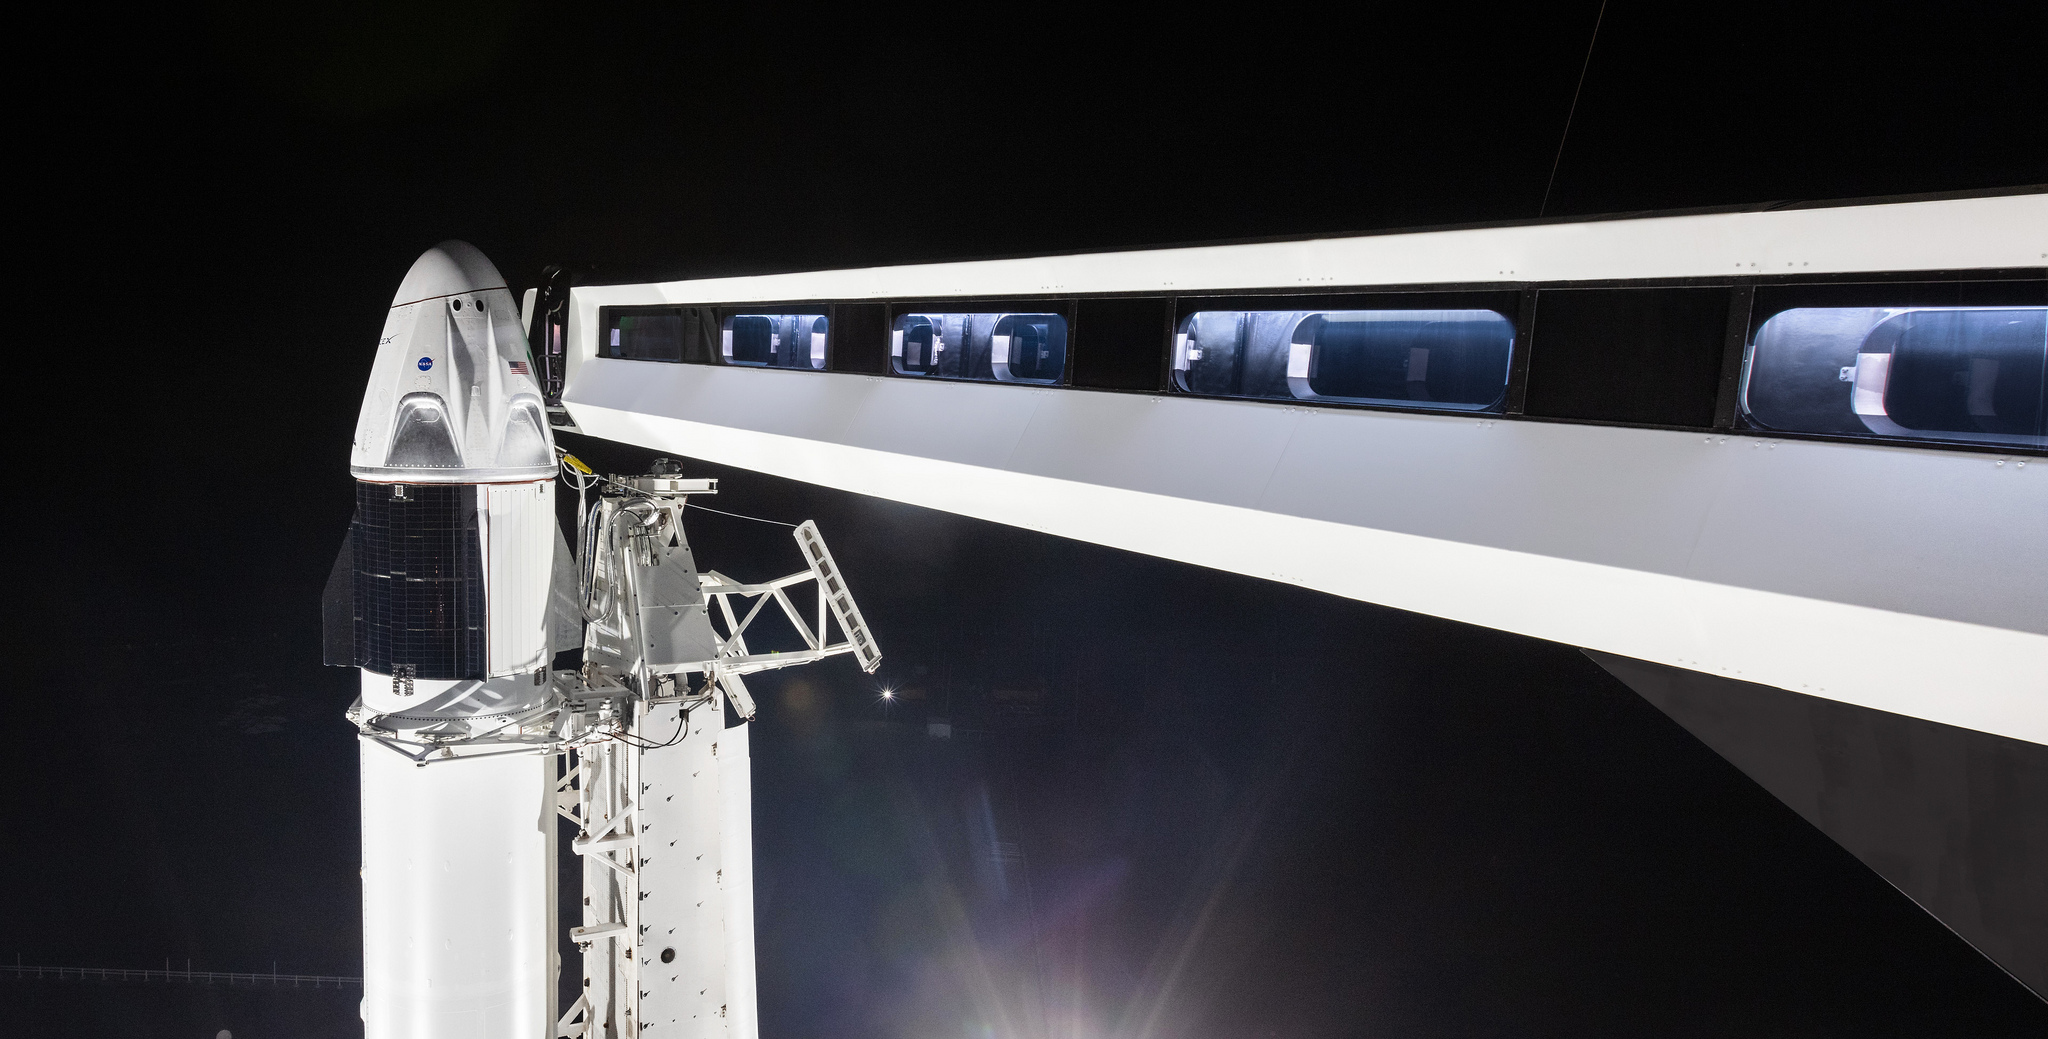 The crew access arm has been extended to the SpaceX Crew Dragon on Jan. 3, 2019, at Launch Complex 39A at Kennedy Space Center.